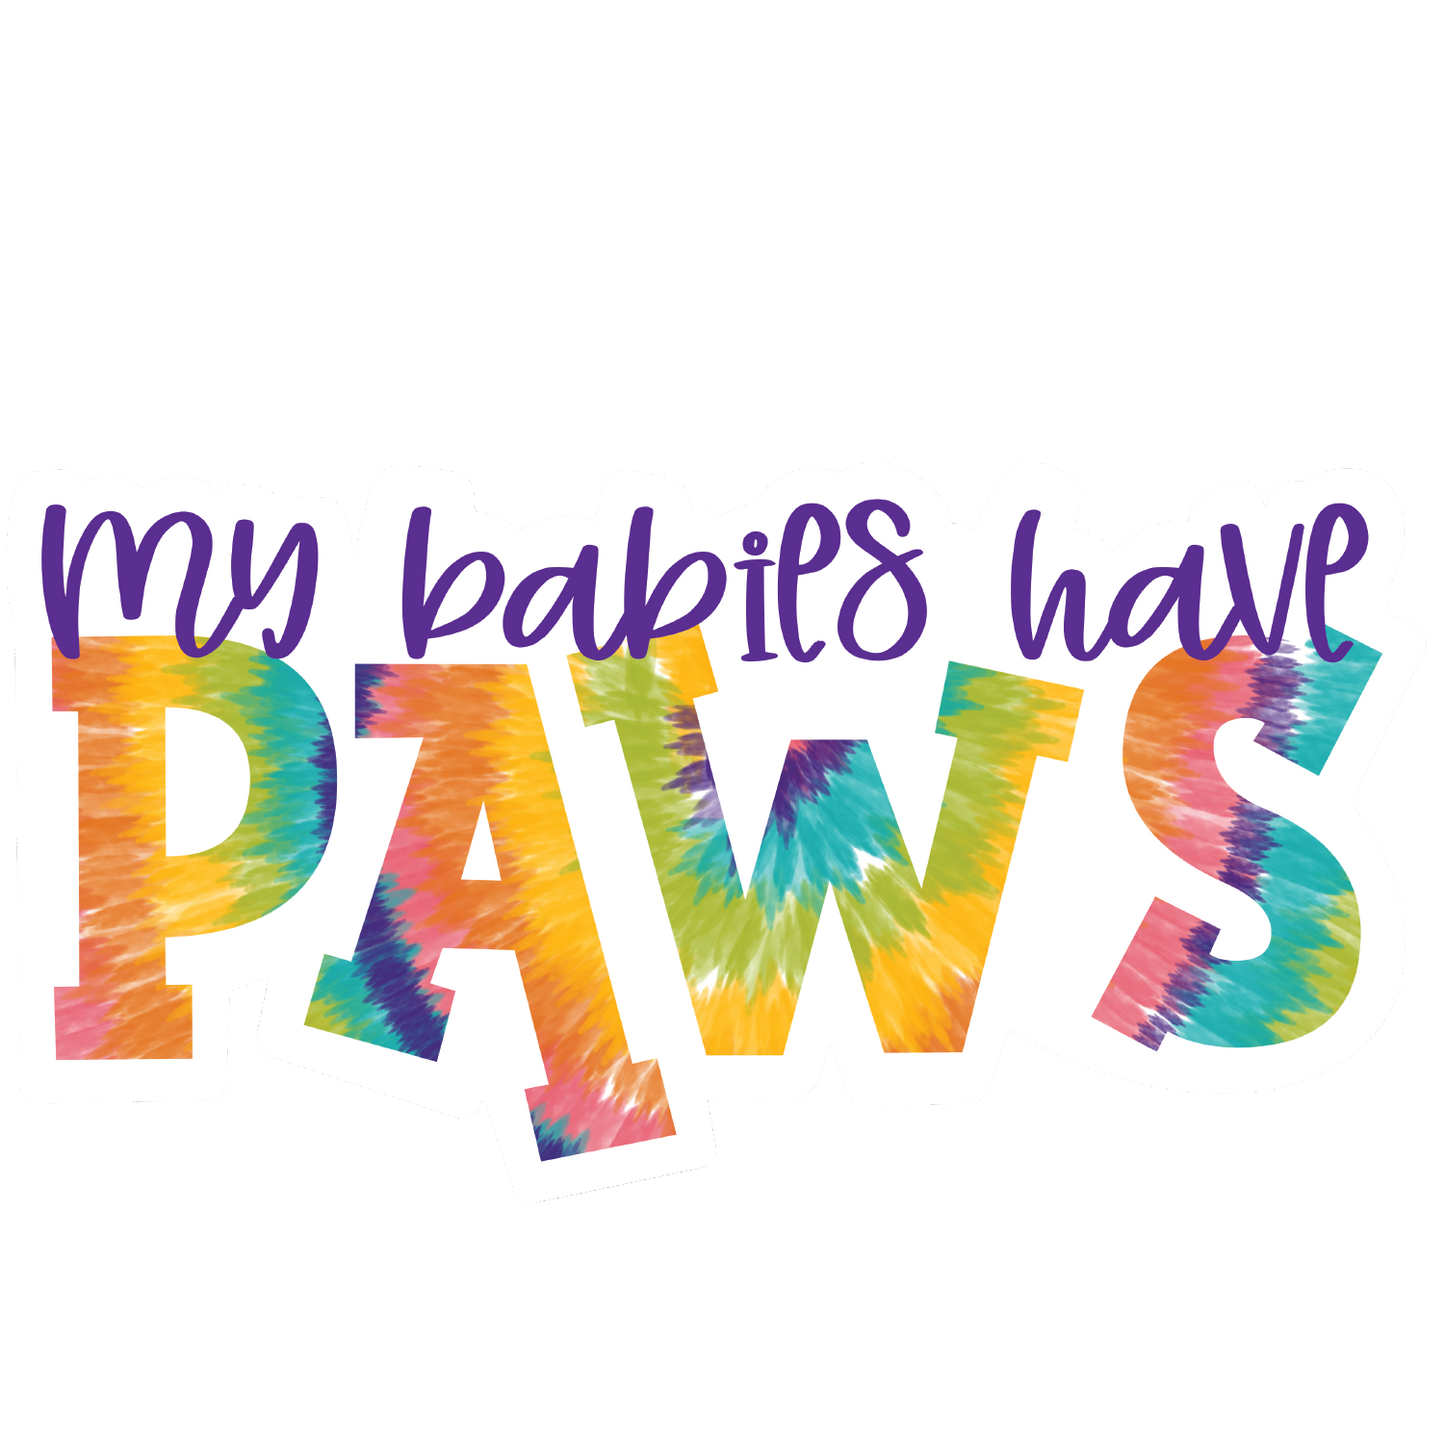 My babies have Paws Adult Tshirt